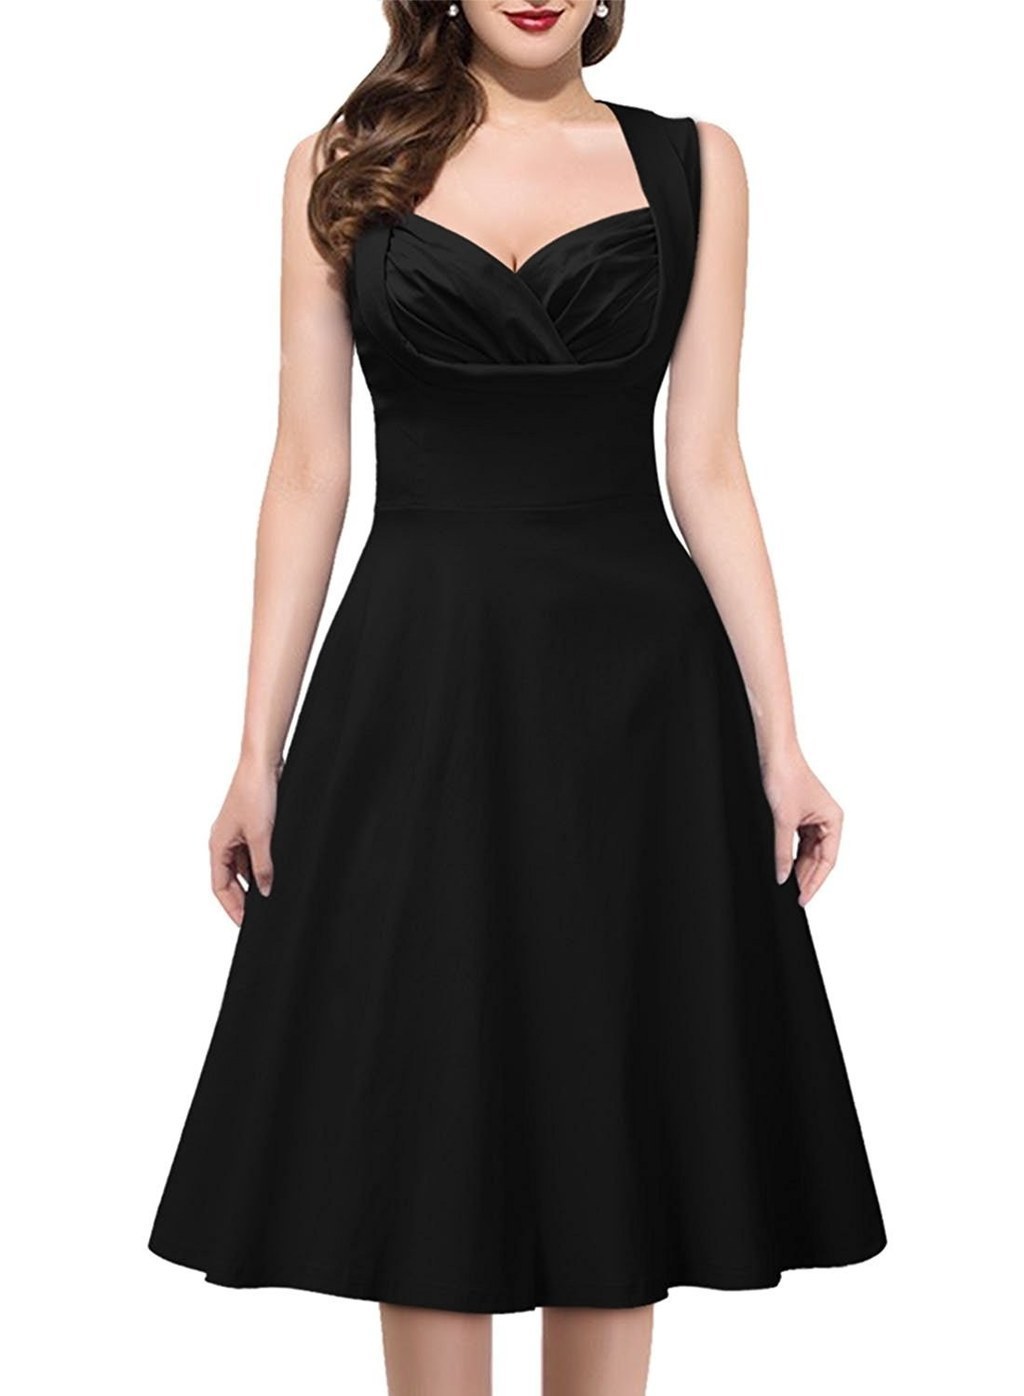 Best Formal Dresses You Can Get On Amazon